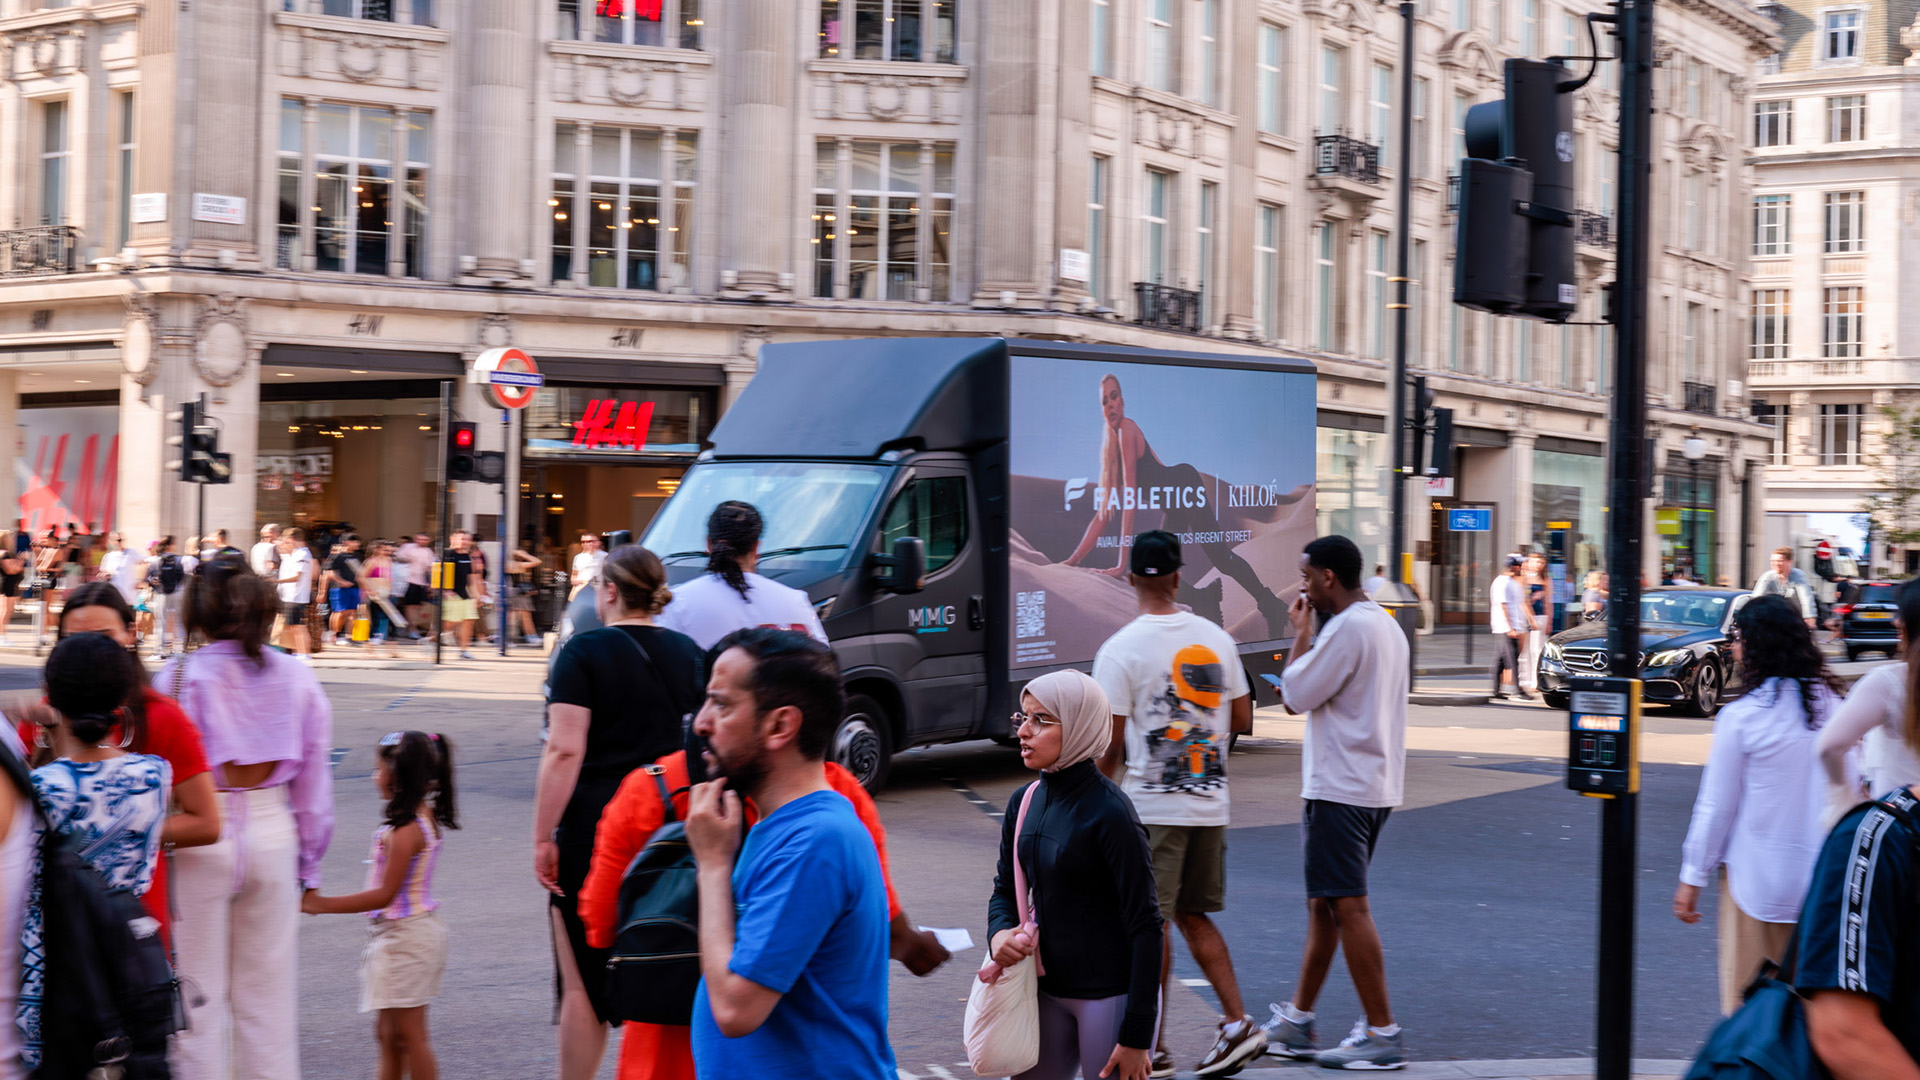 Fabletics triple-sided Digivan activity in London, with audiences looking at it.